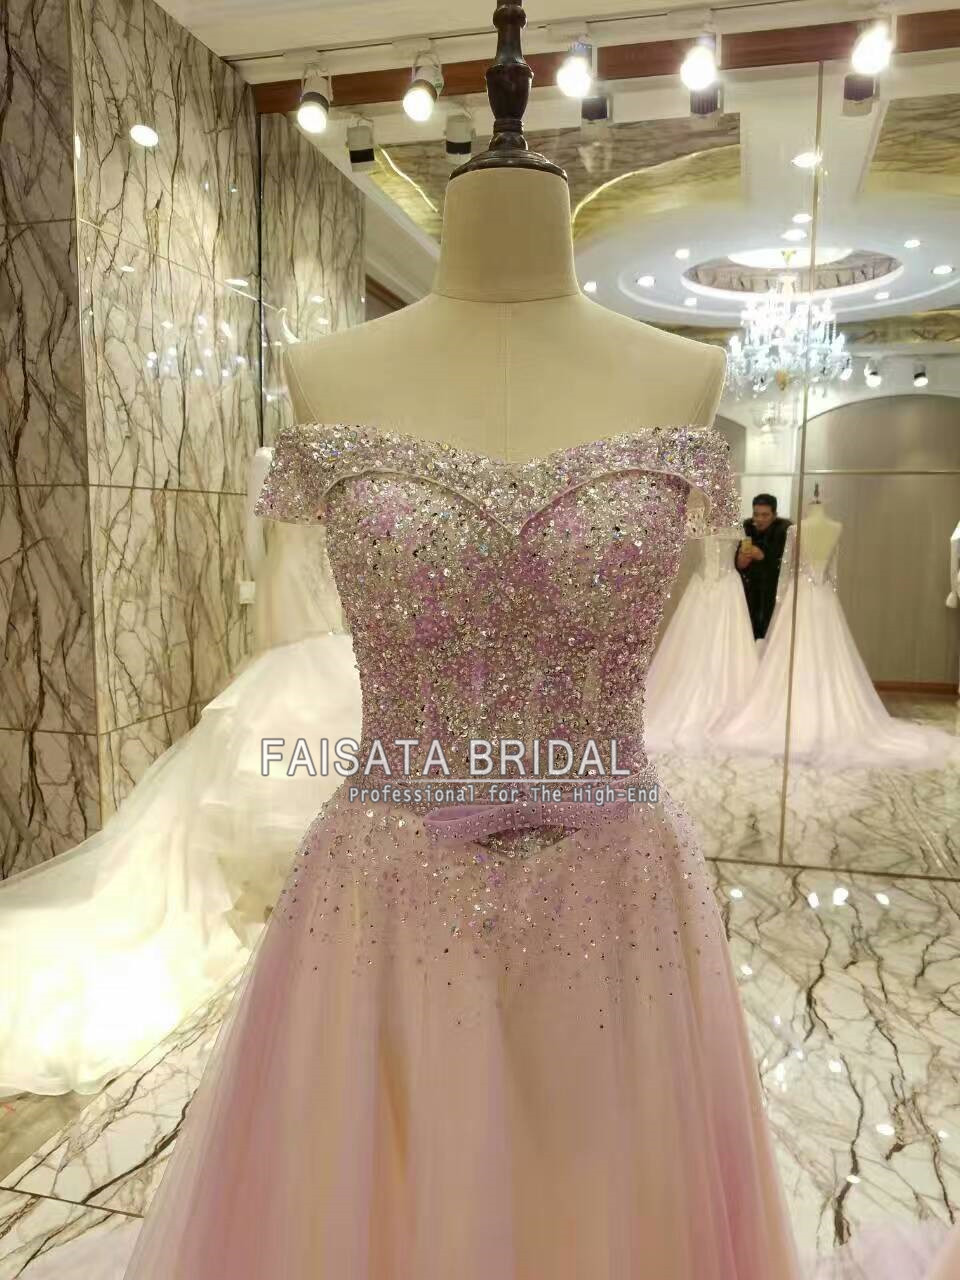 Luxury Crystal A Line Prom Dresses 2017 Boat Neck Beaded Long Sleeve Backless Vestidos De Festa Party Evening Gowns